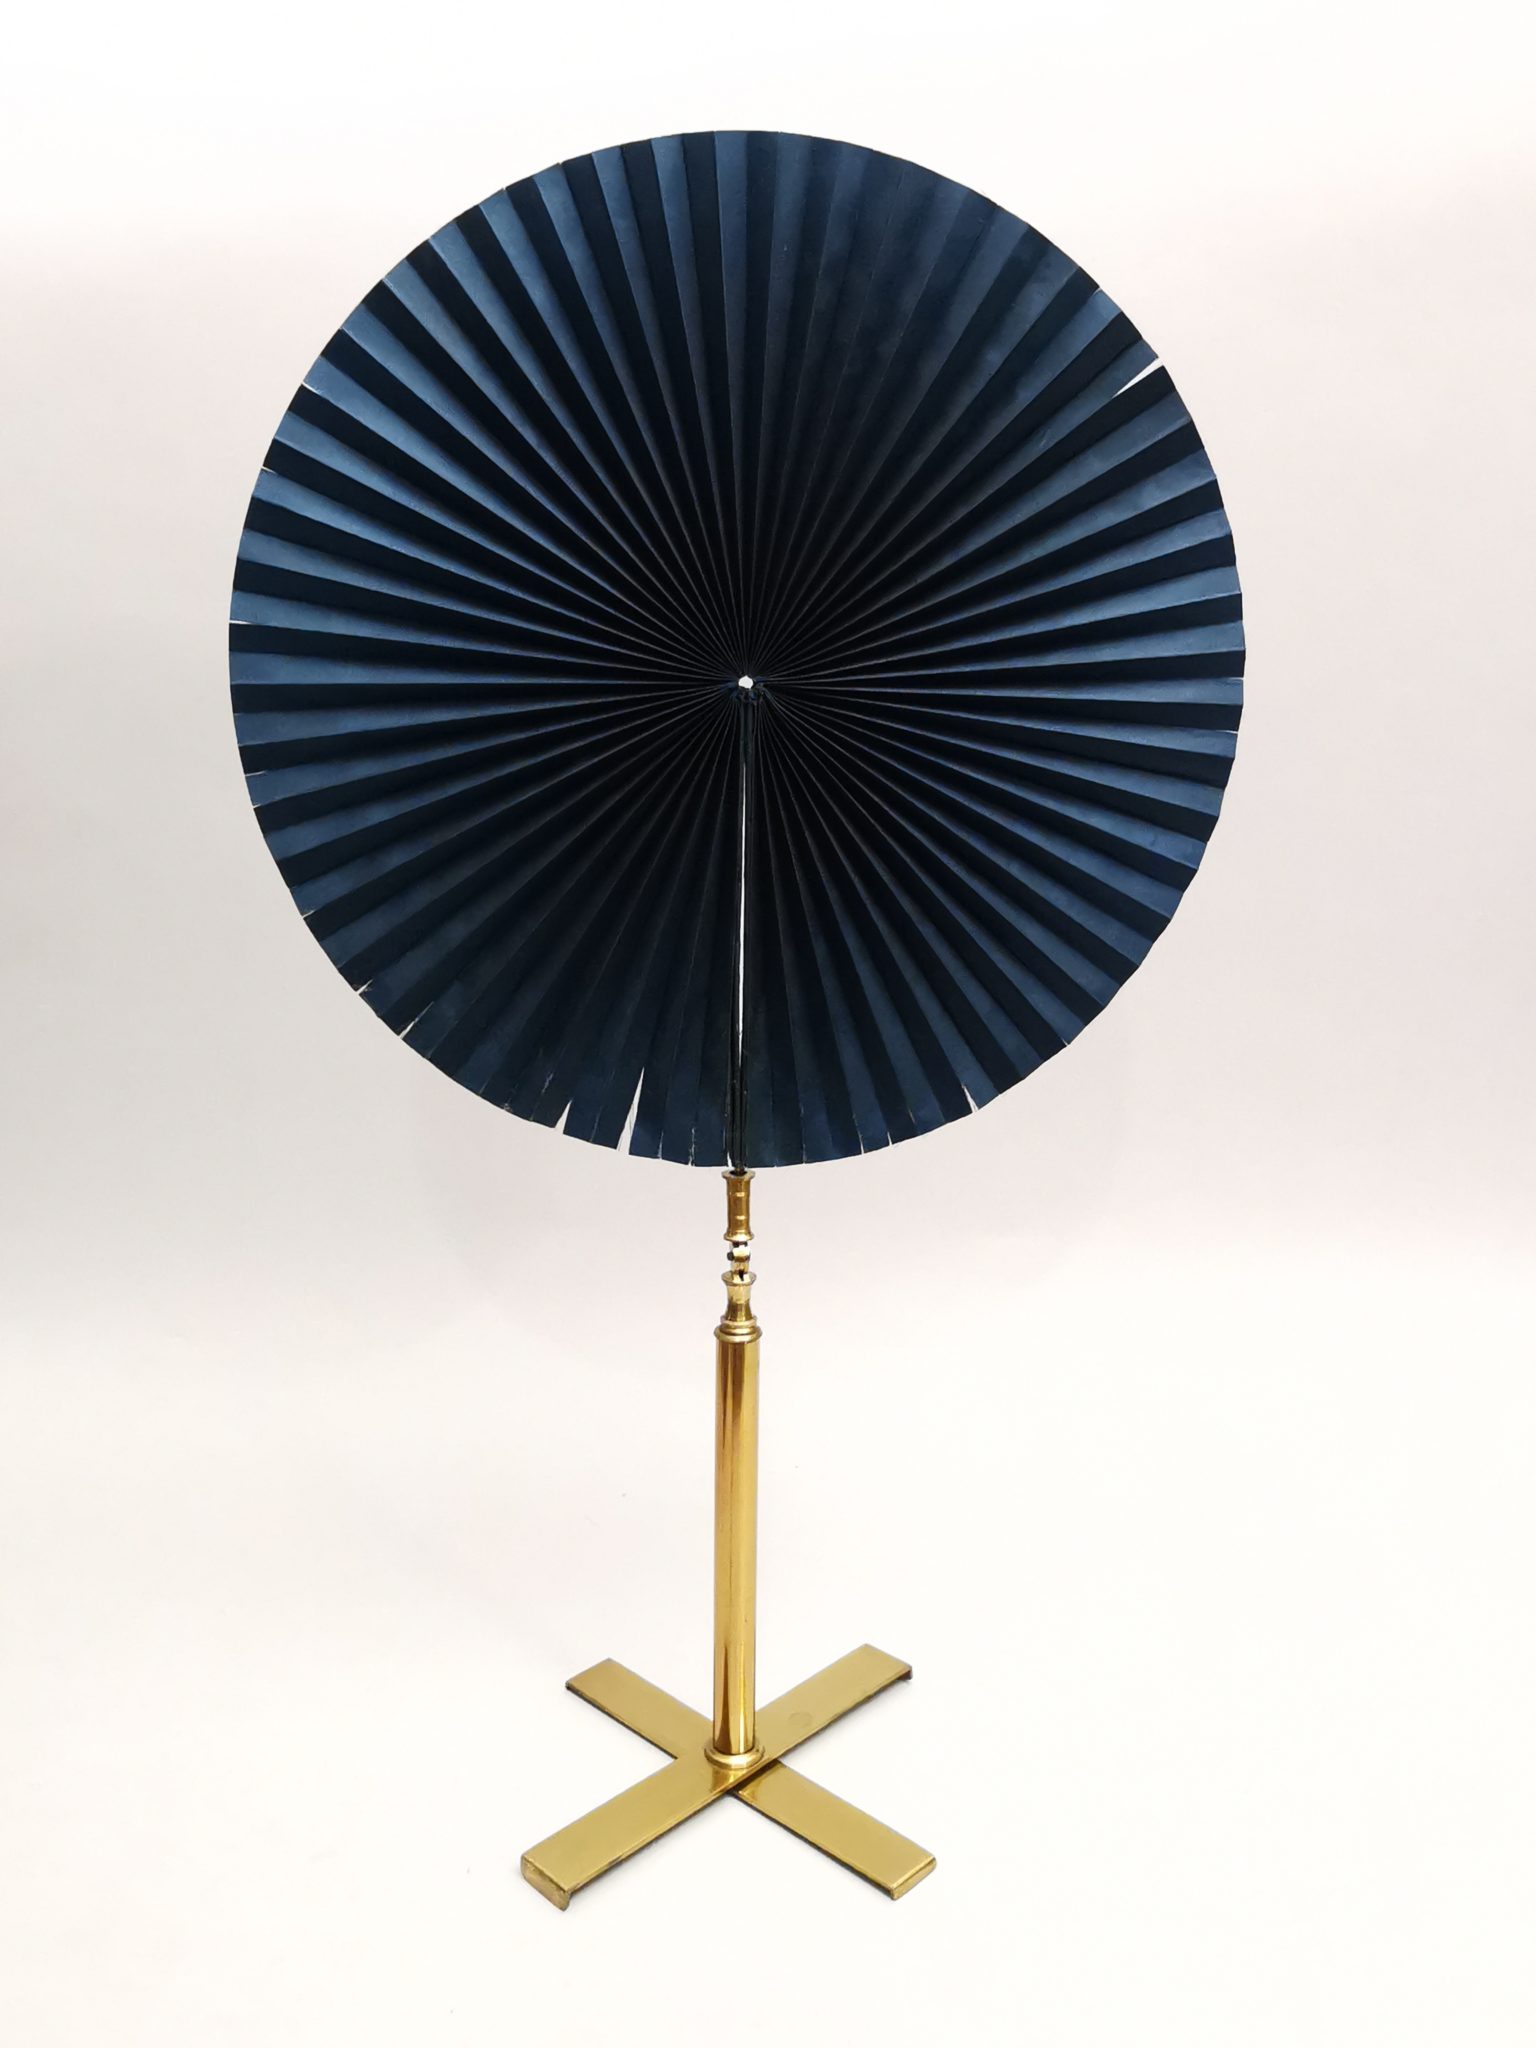 English 19th century beautiful  and rare candle blue silk fan screen light shade by C.W. Dixey”.